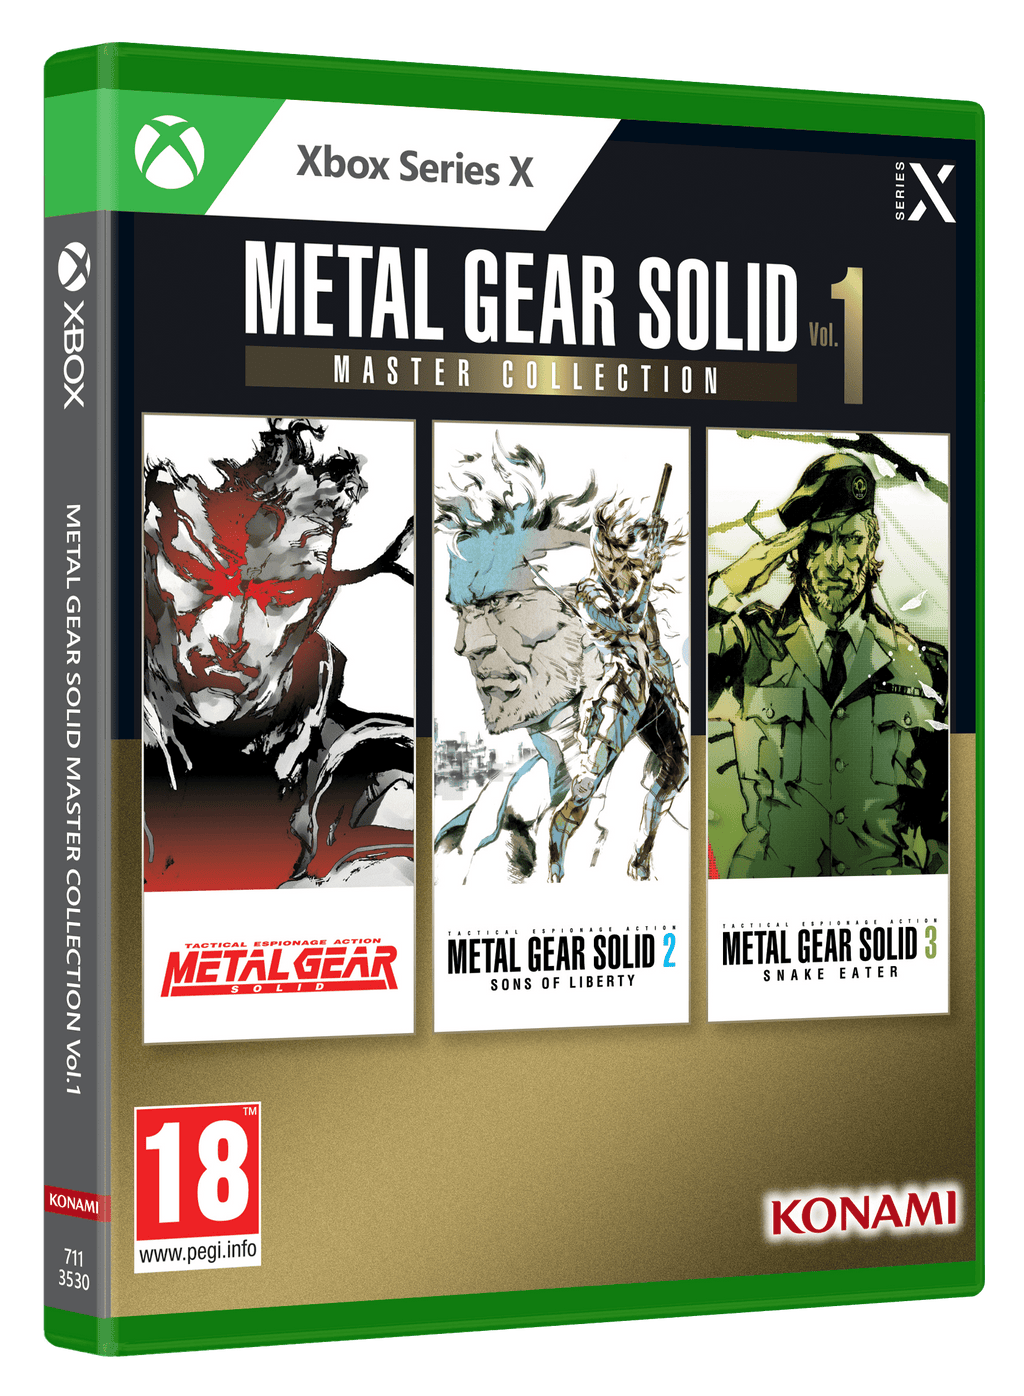 Metal Gear Solid: Master Collection Vol 1 has been dated and detailed —  Maxi-Geek